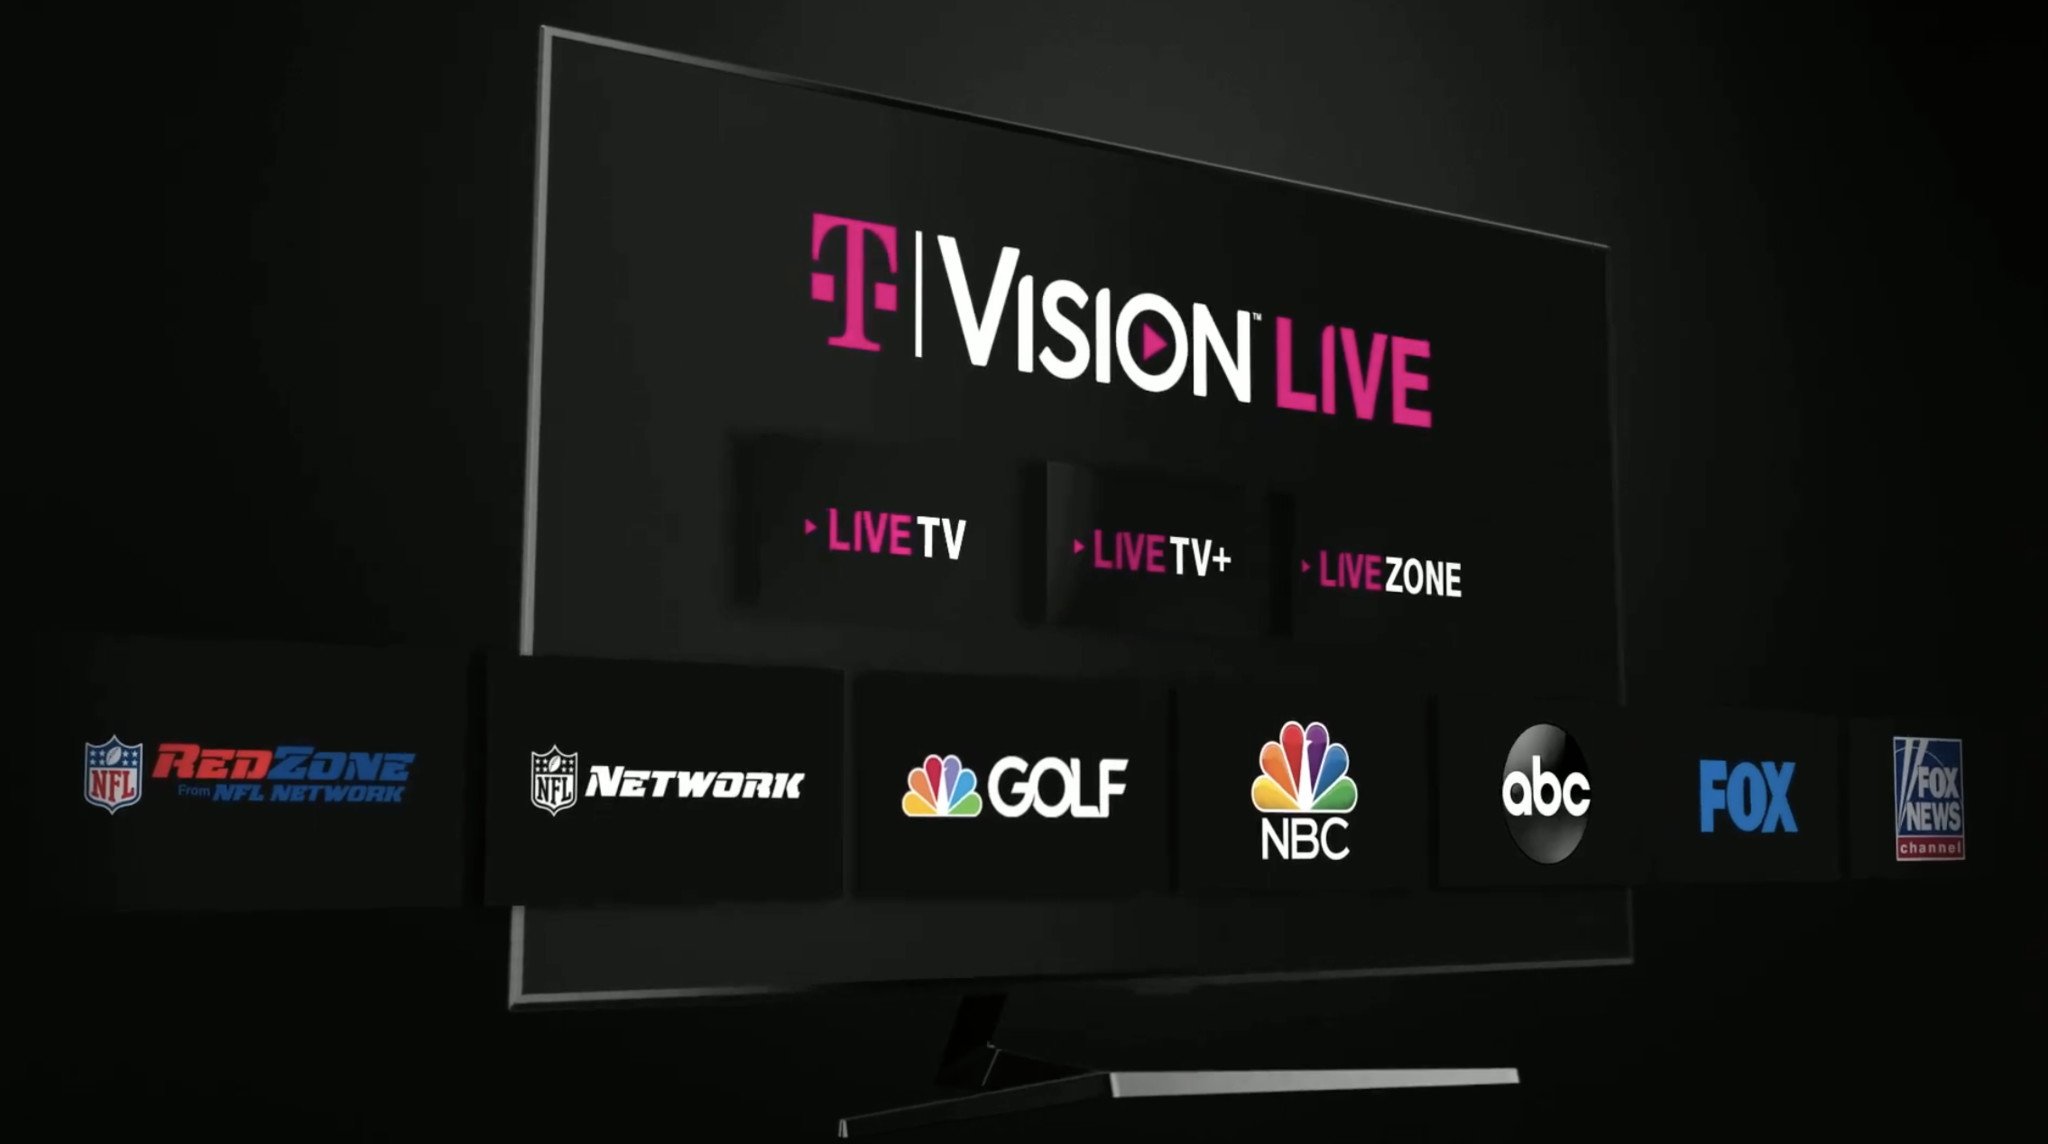 T-Mobile's TVision streaming service offers live TV for just $10